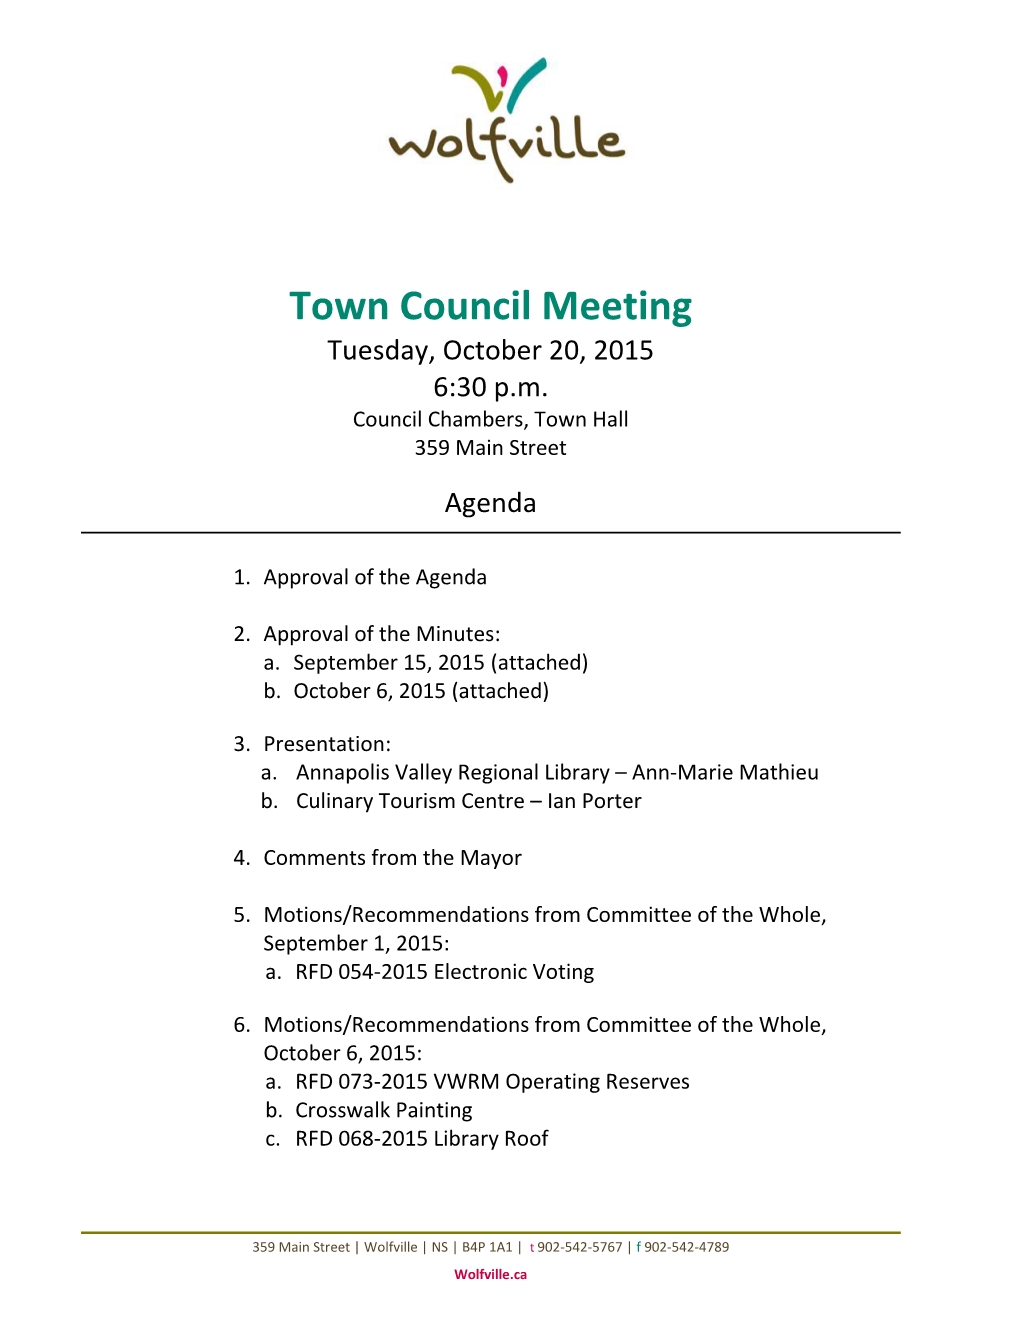 Town Council Meeting Tuesday, October 20, 2015 6:30 P.M